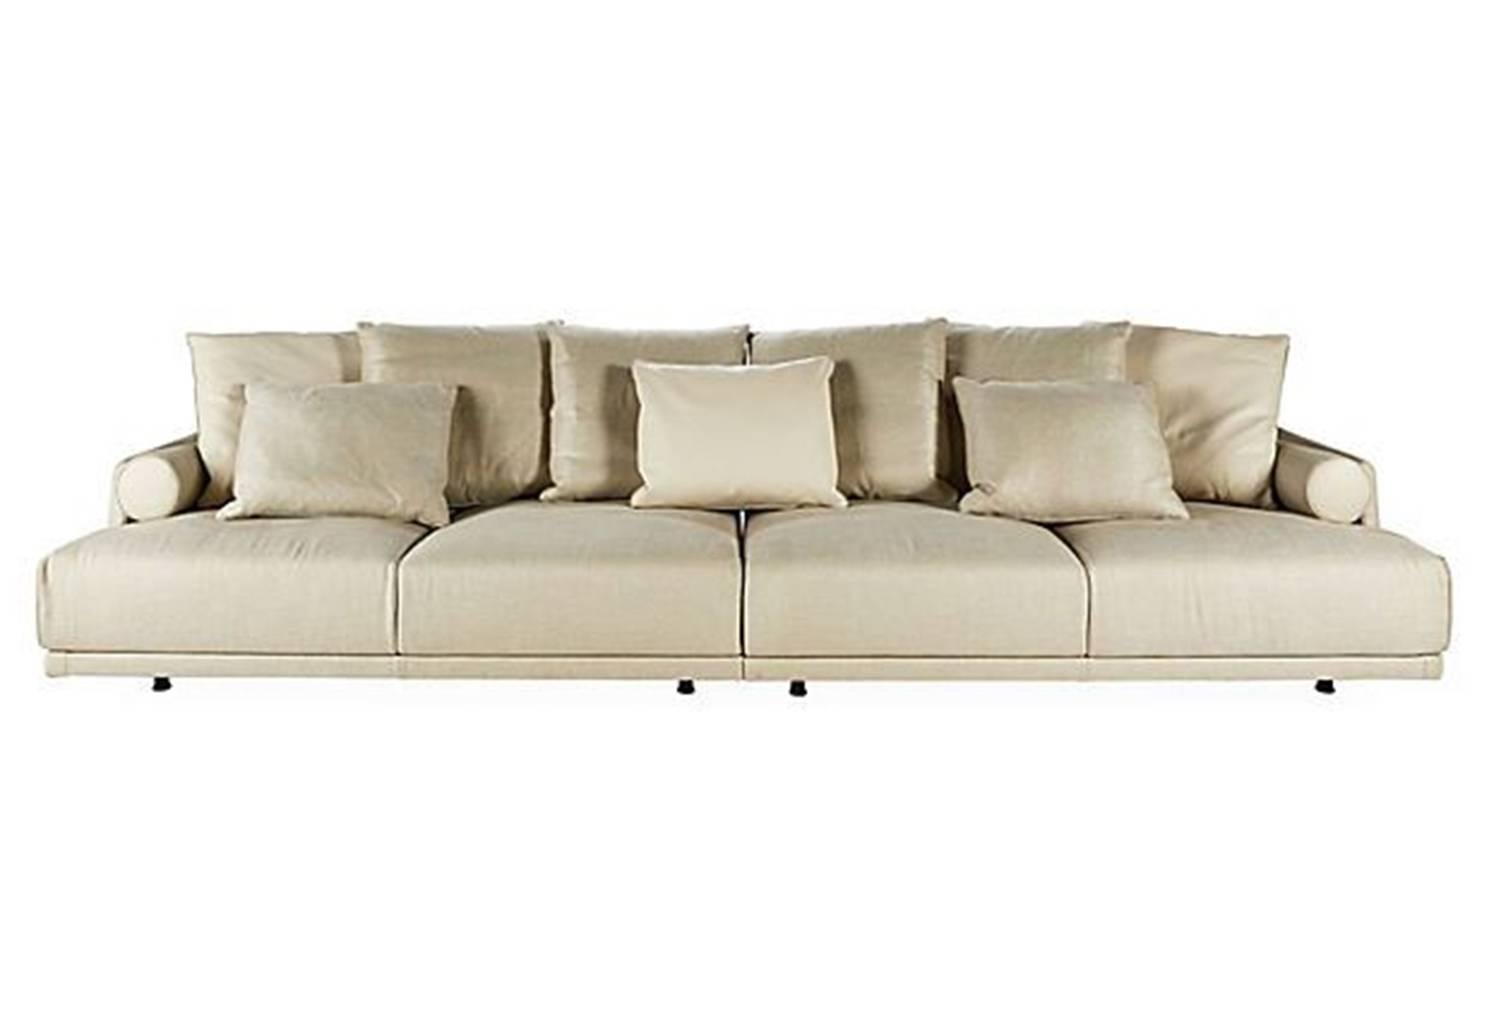 Sofa in beige fabric with piping in beige leather.
Pillows half in beige leather, half in beige fabric